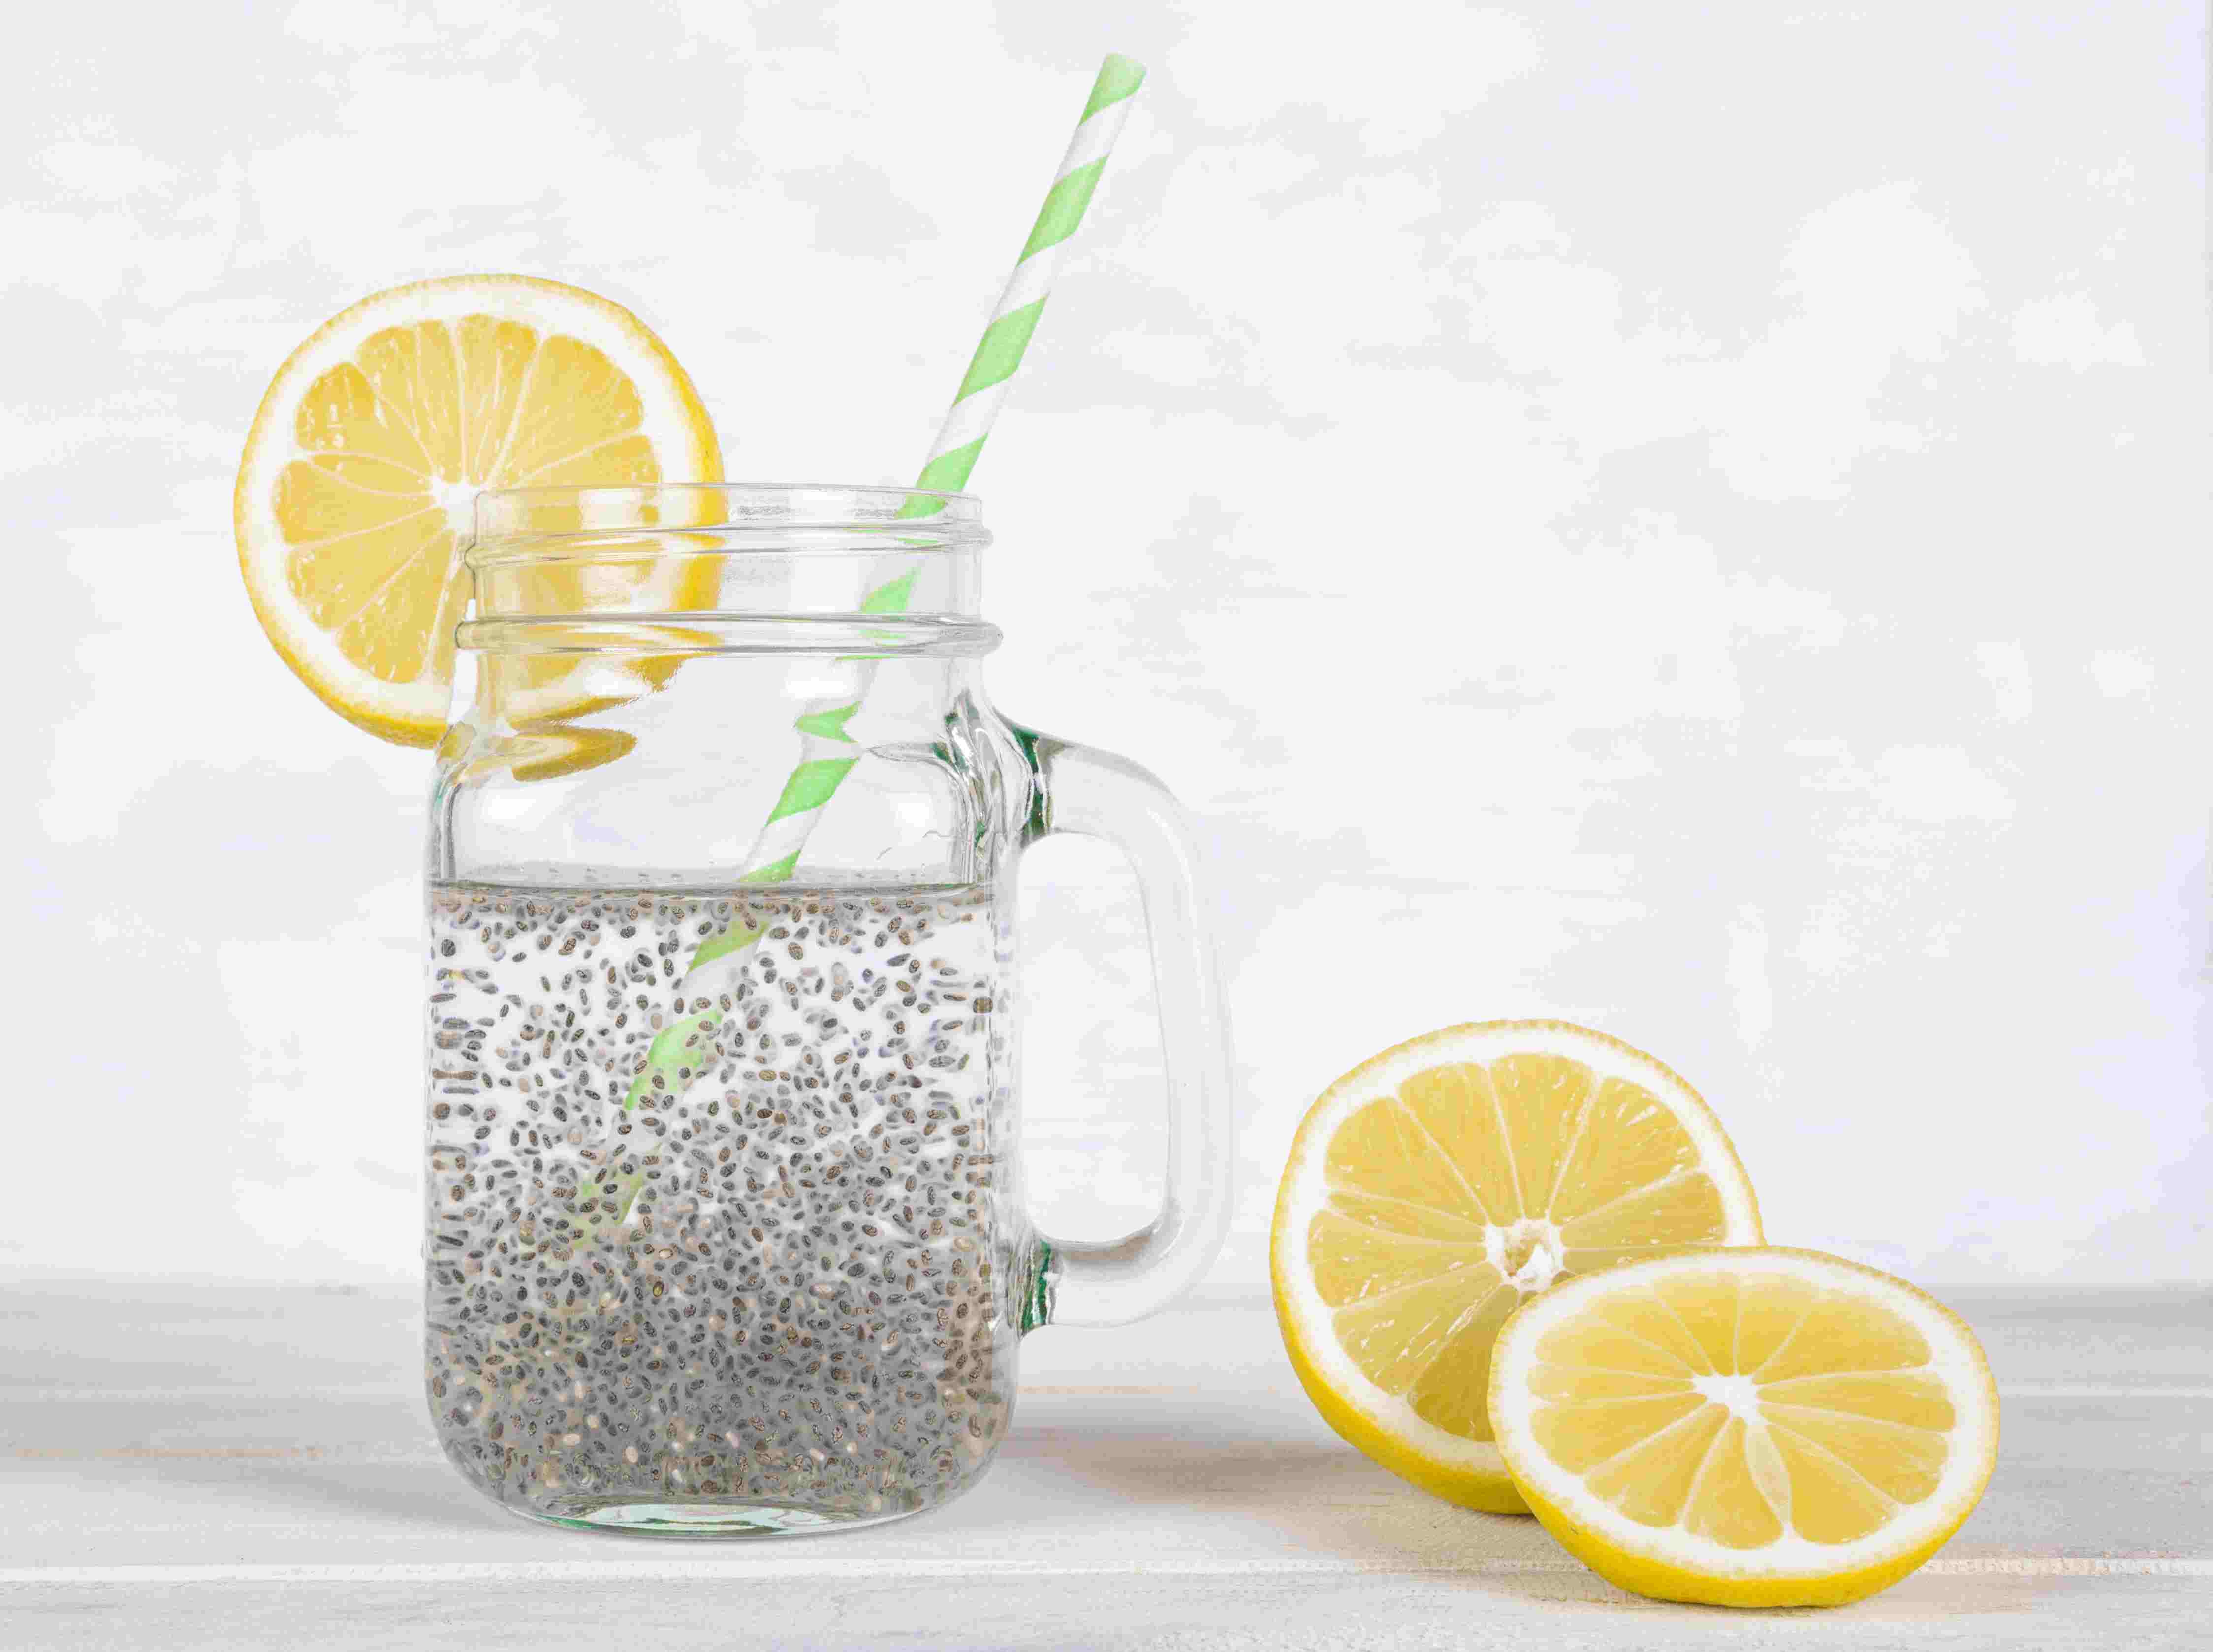 How To Use Chia Seeds In Water